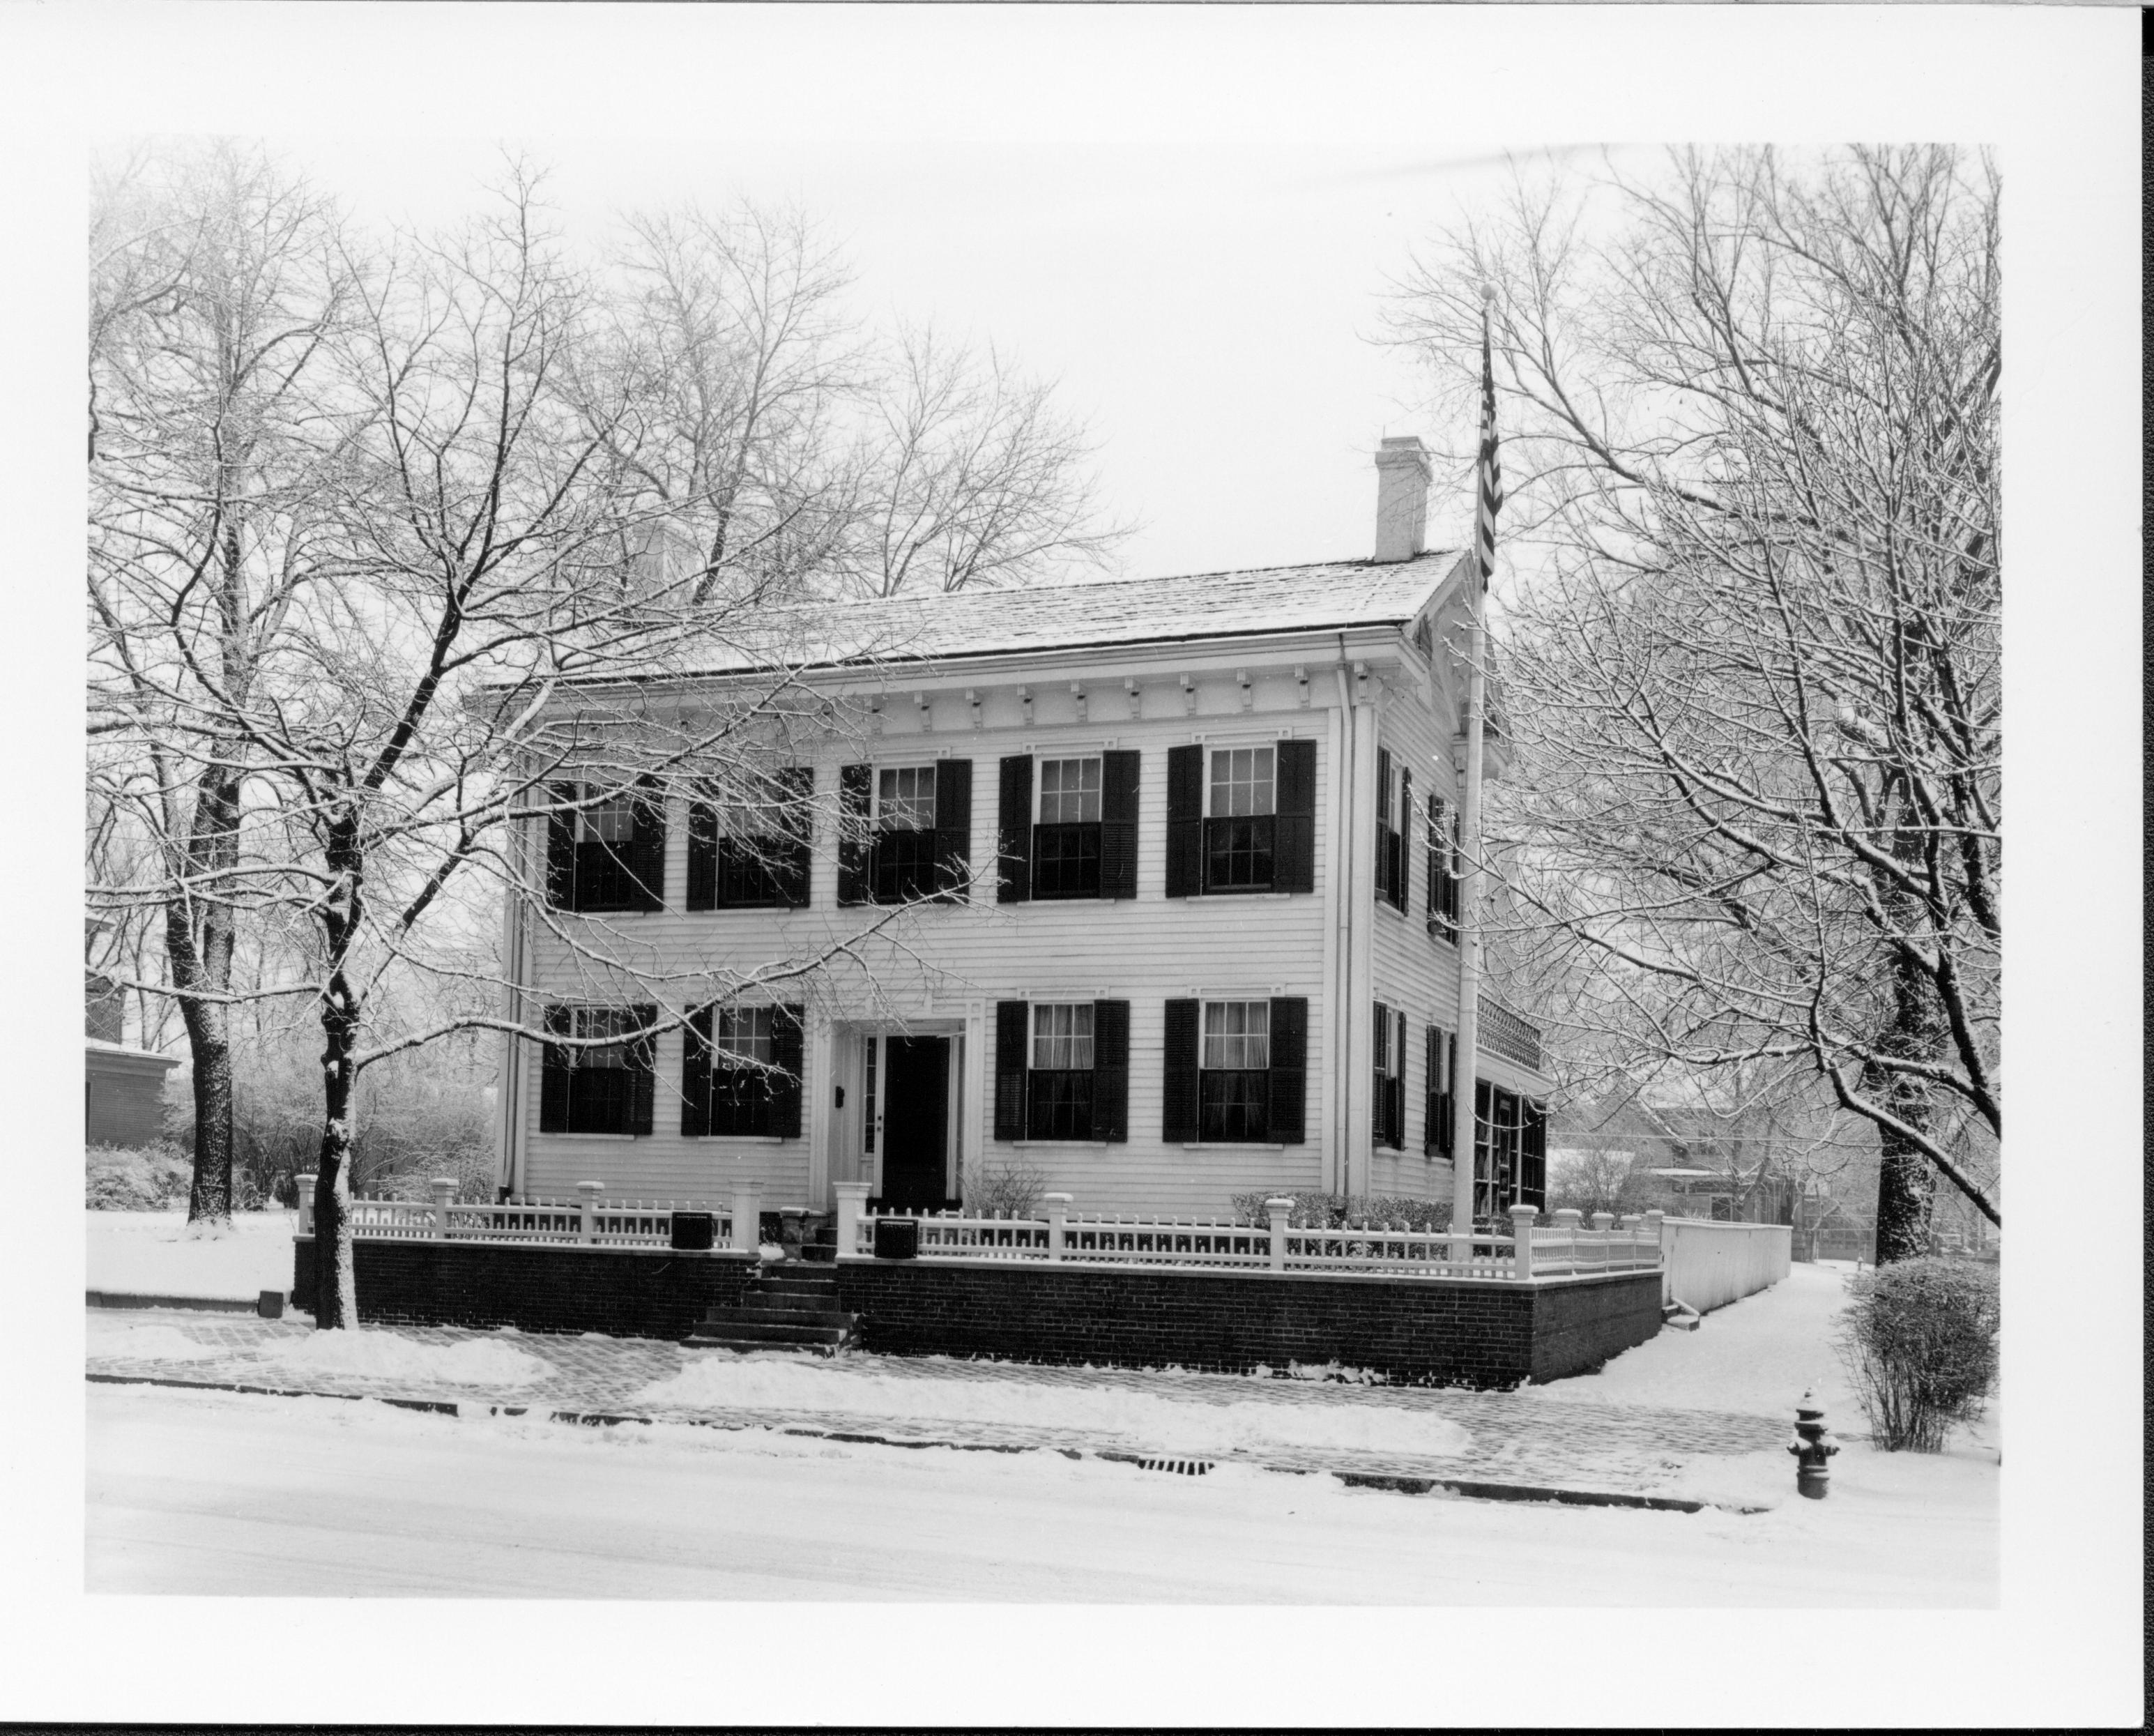 Lincoln Home west (front) elevation in winter, with flagpole in corner behind picket fence. Fire hydrant on corner of brick plaza.  Two story houses on Bugg lot (Block 10, lot 5) on far left, and behind in Kercheval lot (Block 10, lot 9) in background right. Back porch screened in. Looking East/Northeasat from 8th Street Lincoln Home, snow, Bugg, Kercheval, brick plaza, flagpole, screened back porch